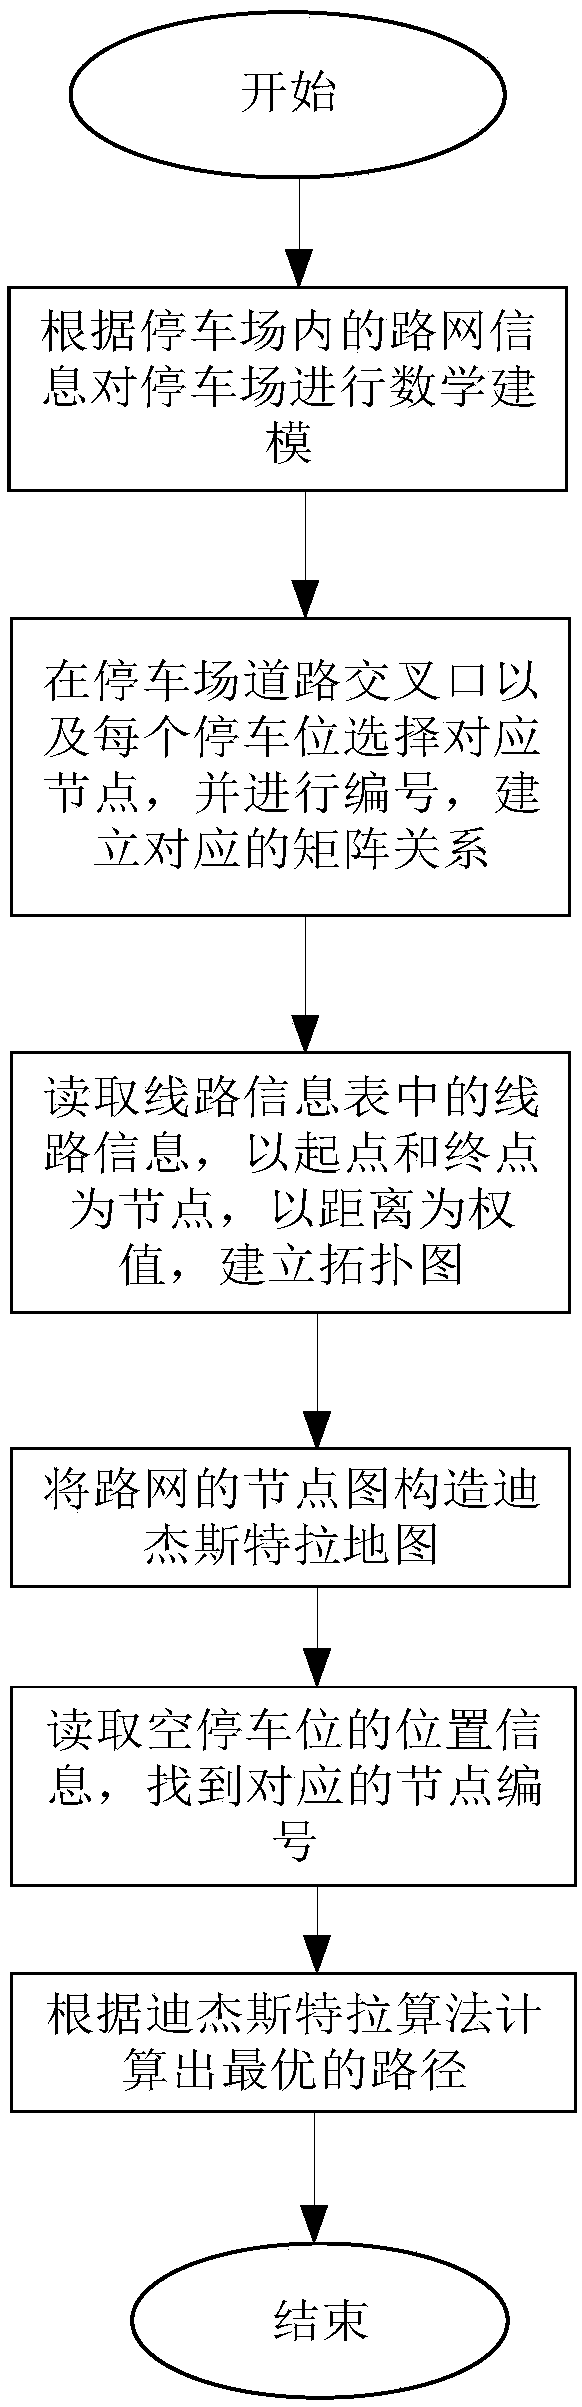 Parking path planning method for automatic driving system of parking lot